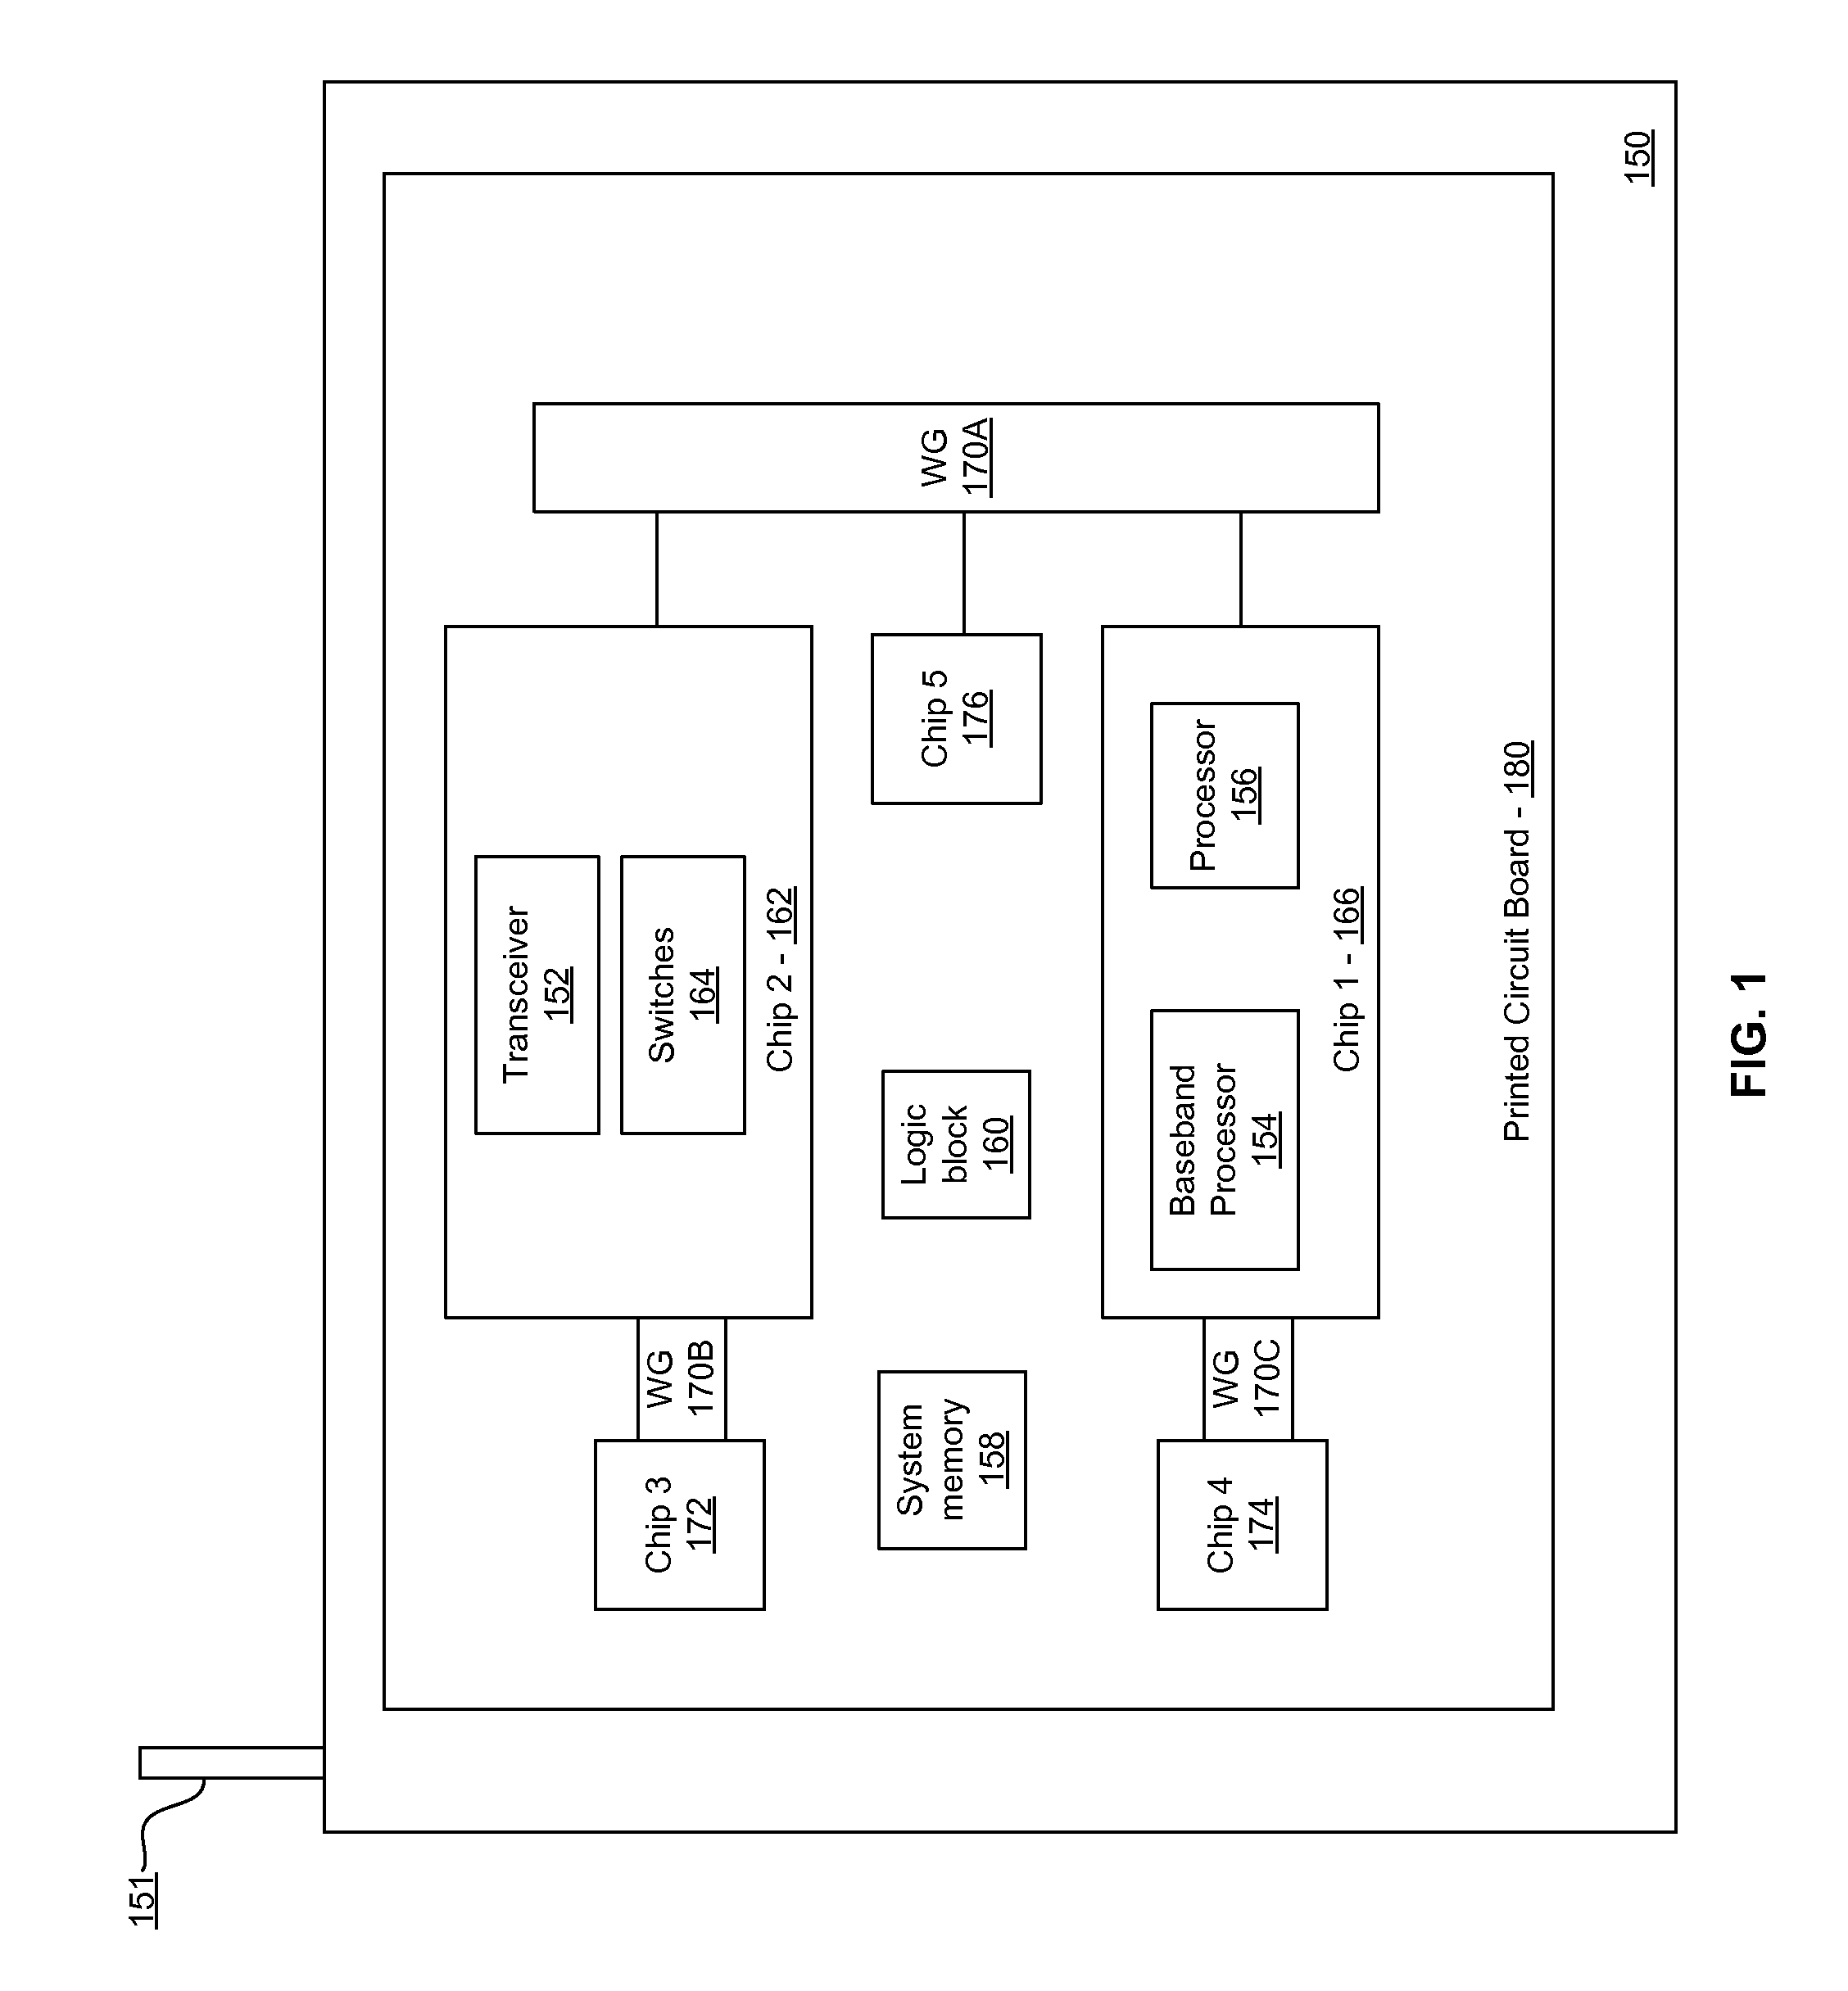 Method and system for intra-printed circuit board communication via waveguides